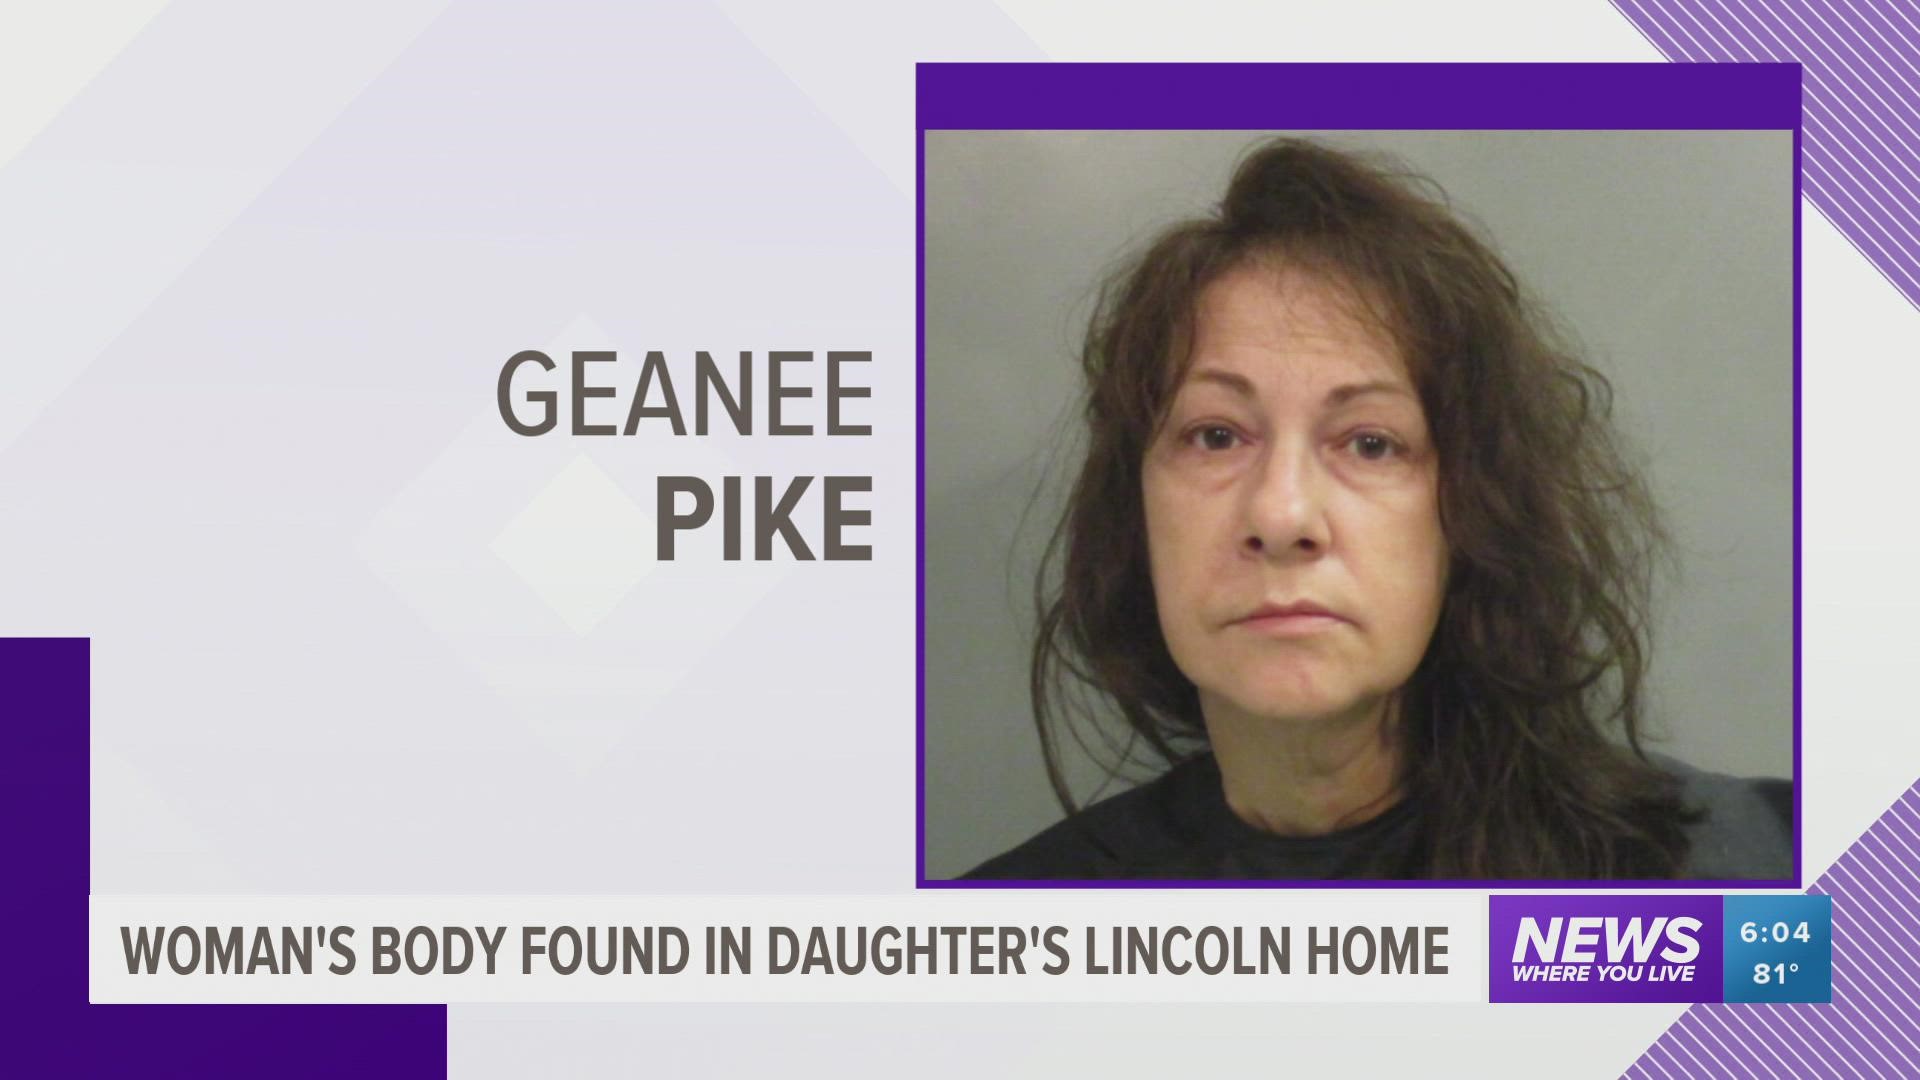 Geanee Pike was arrested for financial identity fraud and abuse of a corpse after her mother's body was found wrapped in a newspaper inside her home.